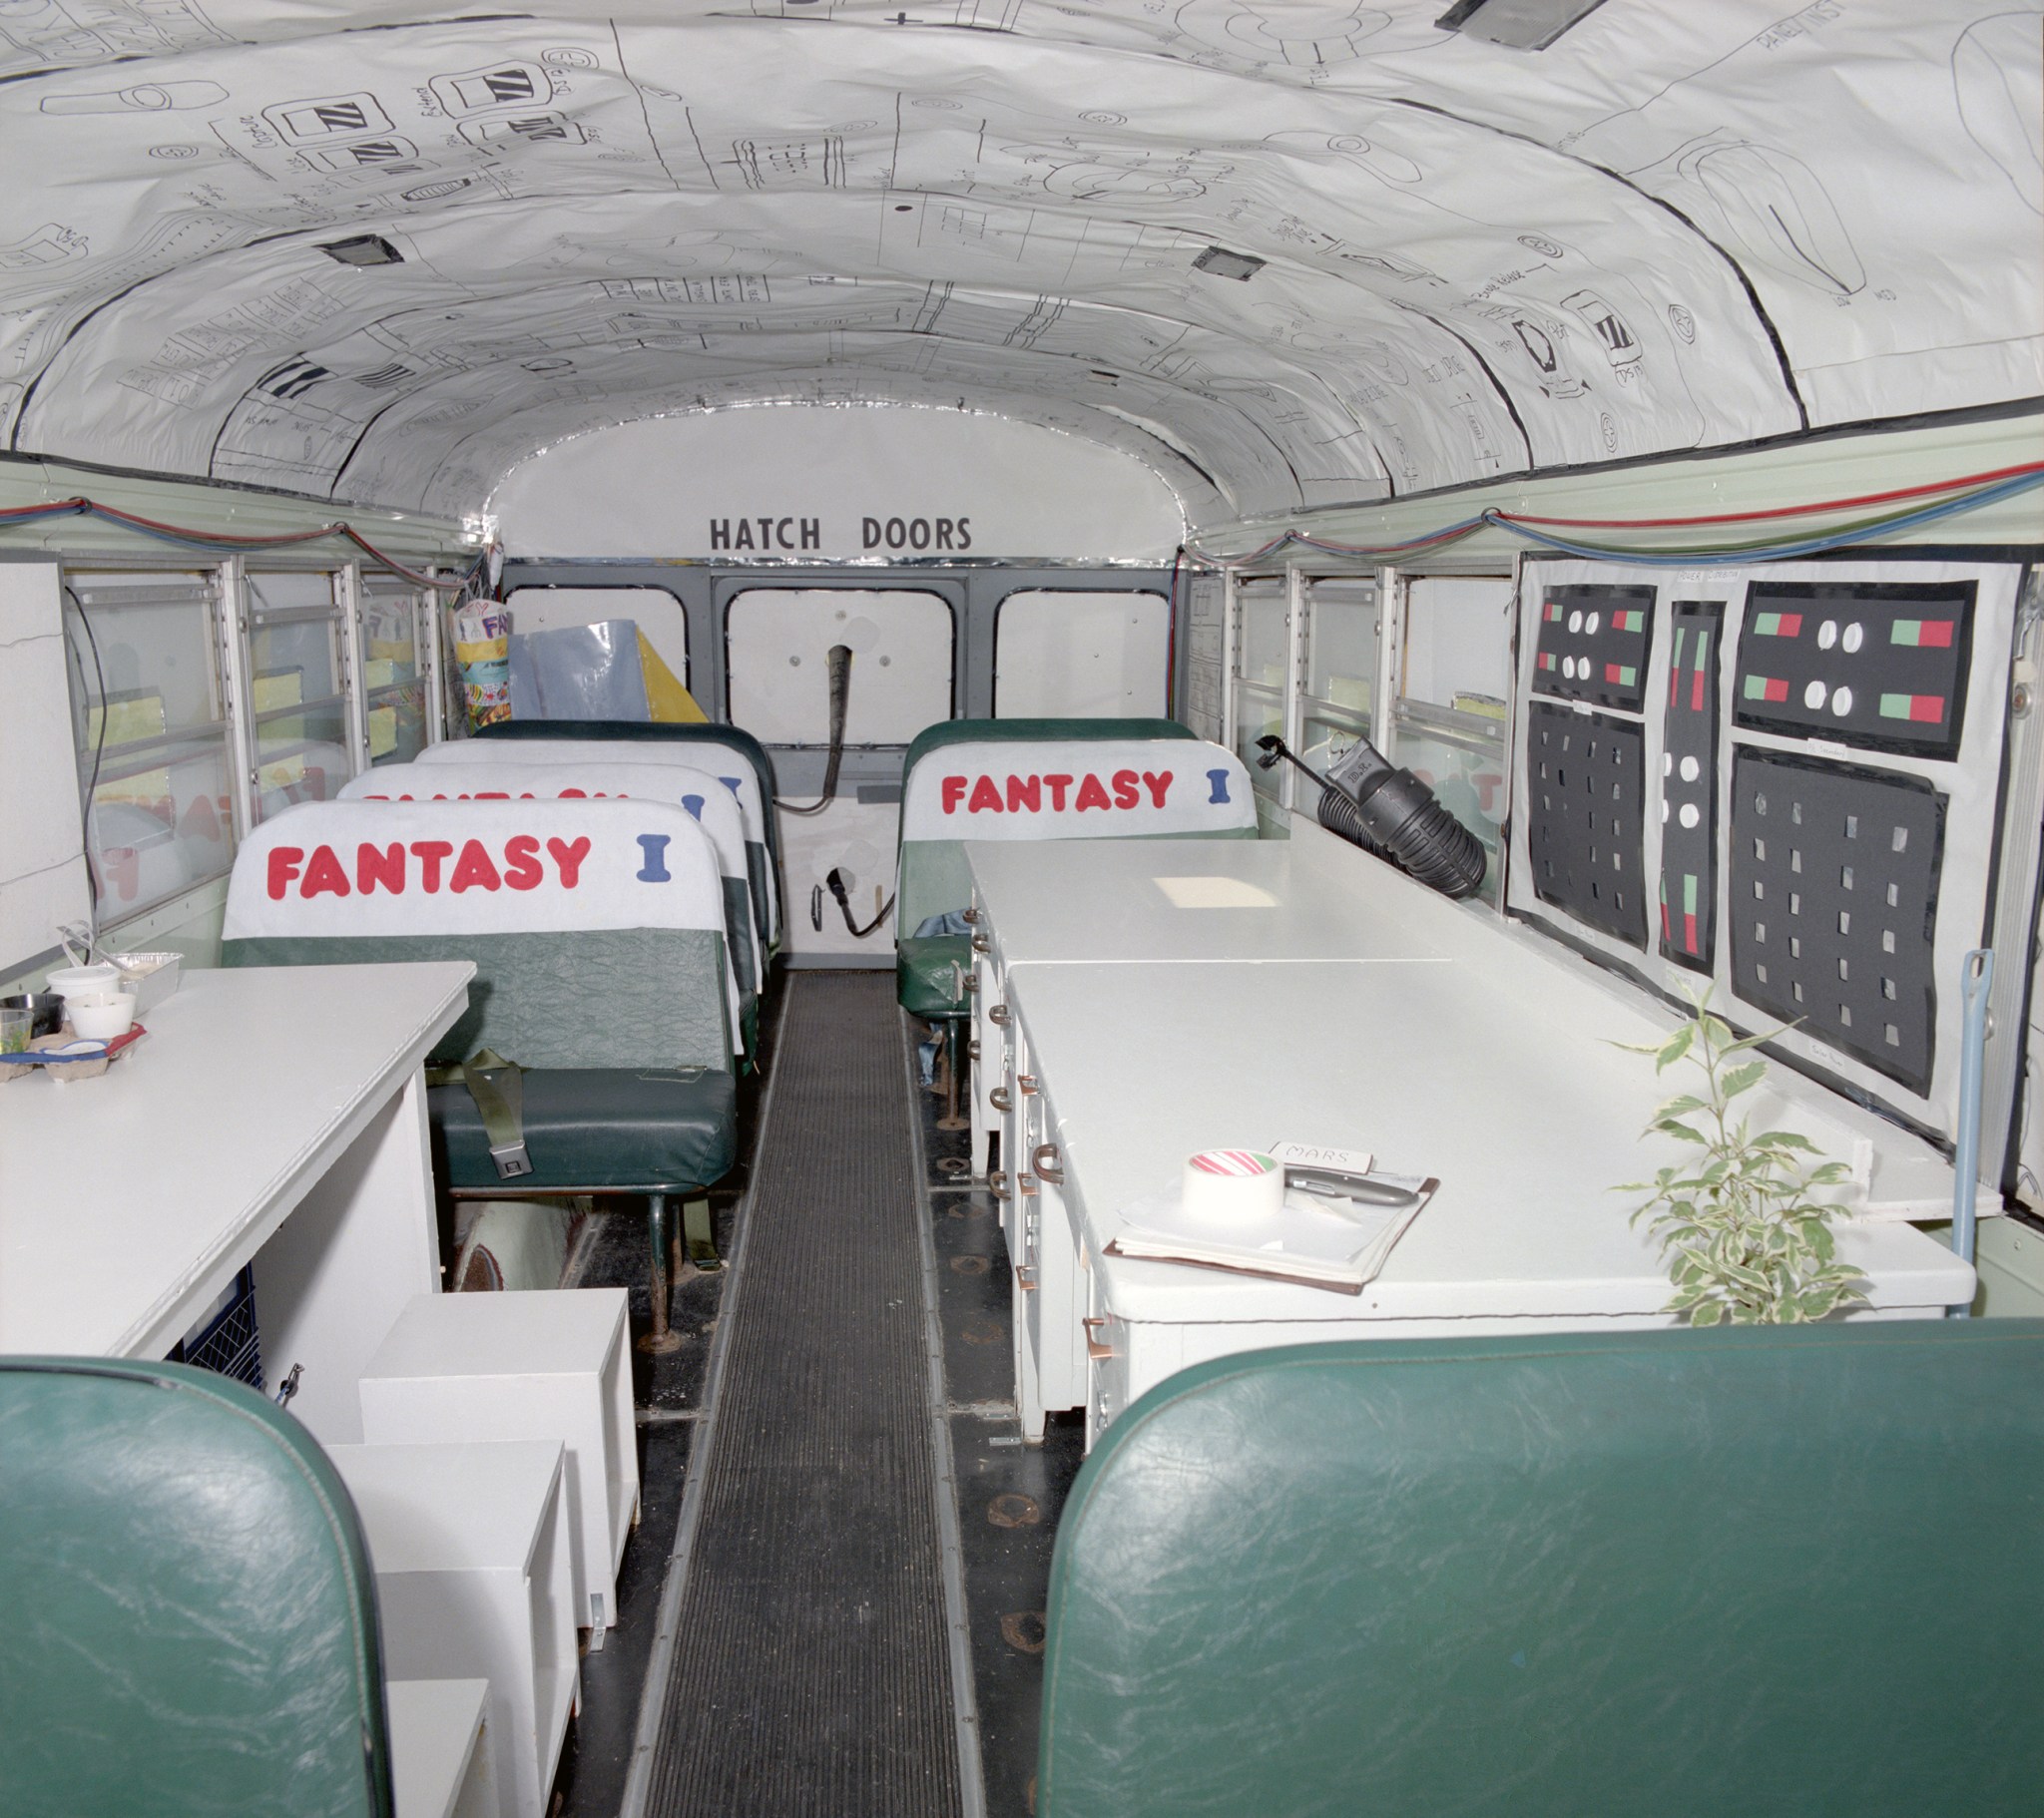 Interior of bus decorated as space shuttle.